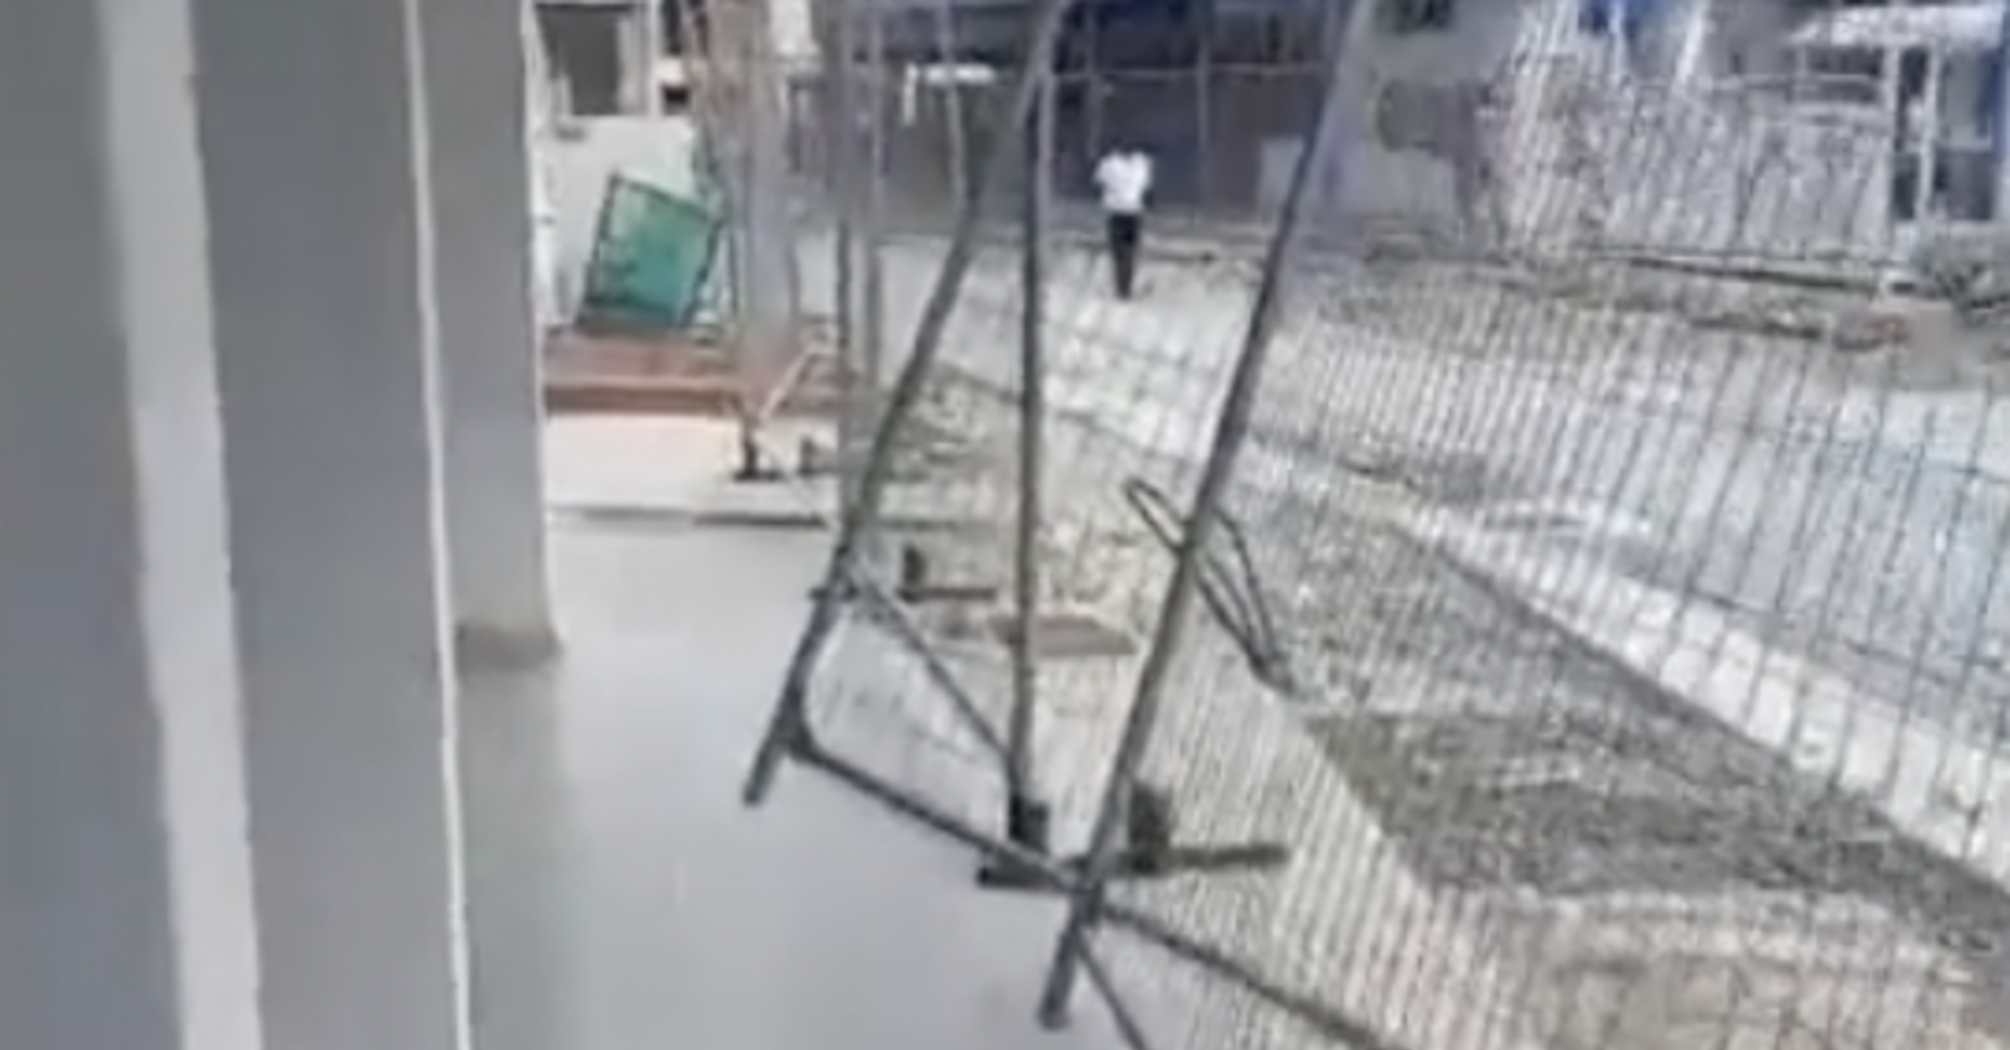 A tourist arrived on a dream vacation in Cyprus and saw a construction site instead of a resort. Video.